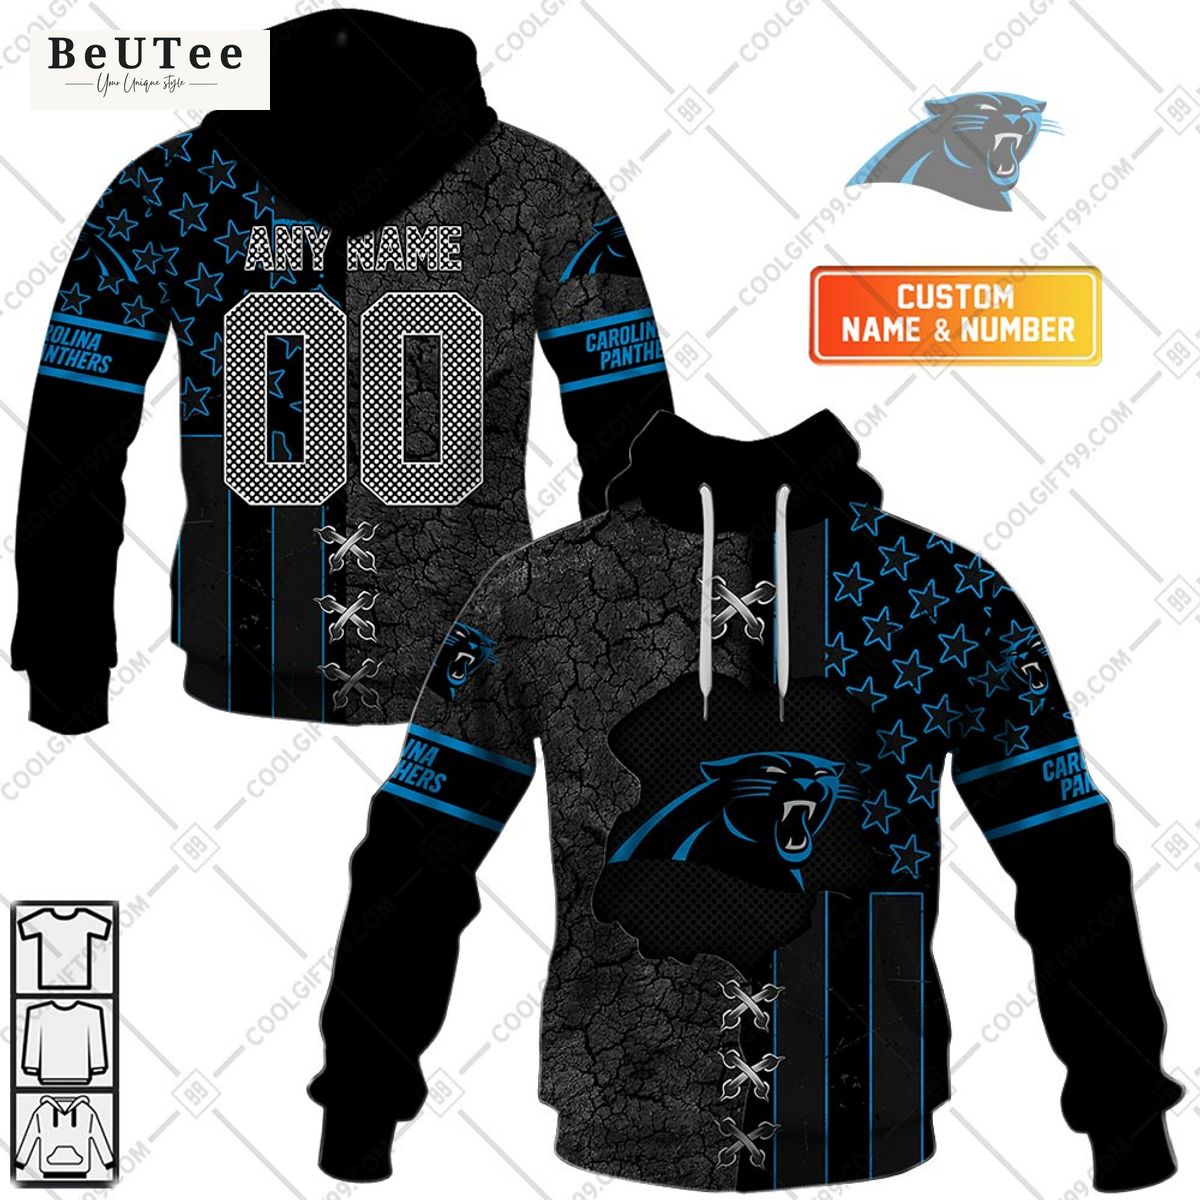 Carolina Panthers printed hoodie shirt NFL customized Best picture ever